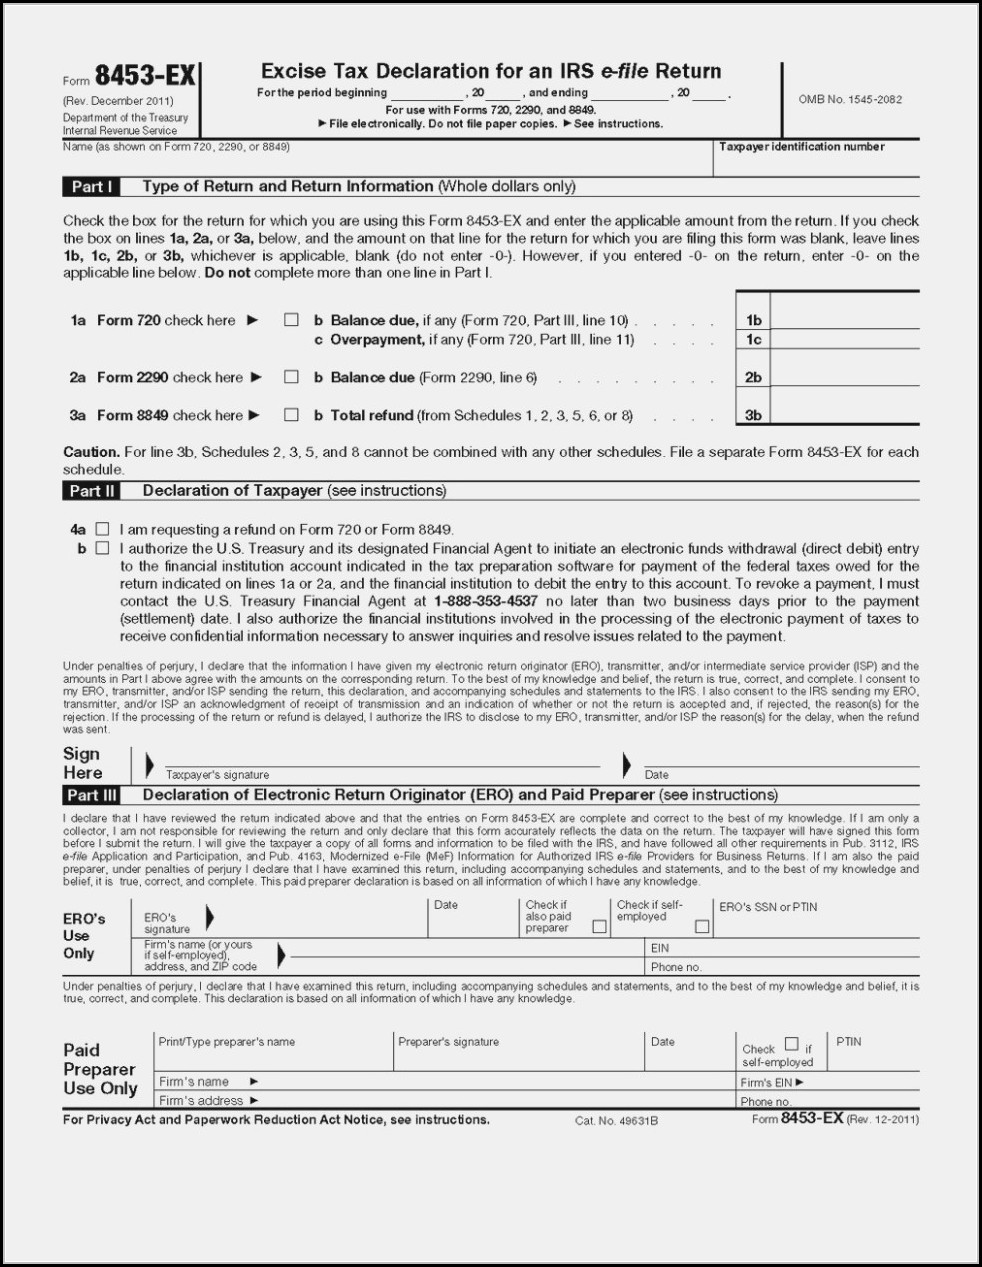 irs-2290-form-instructions-form-resume-examples-ygkzloo8p9